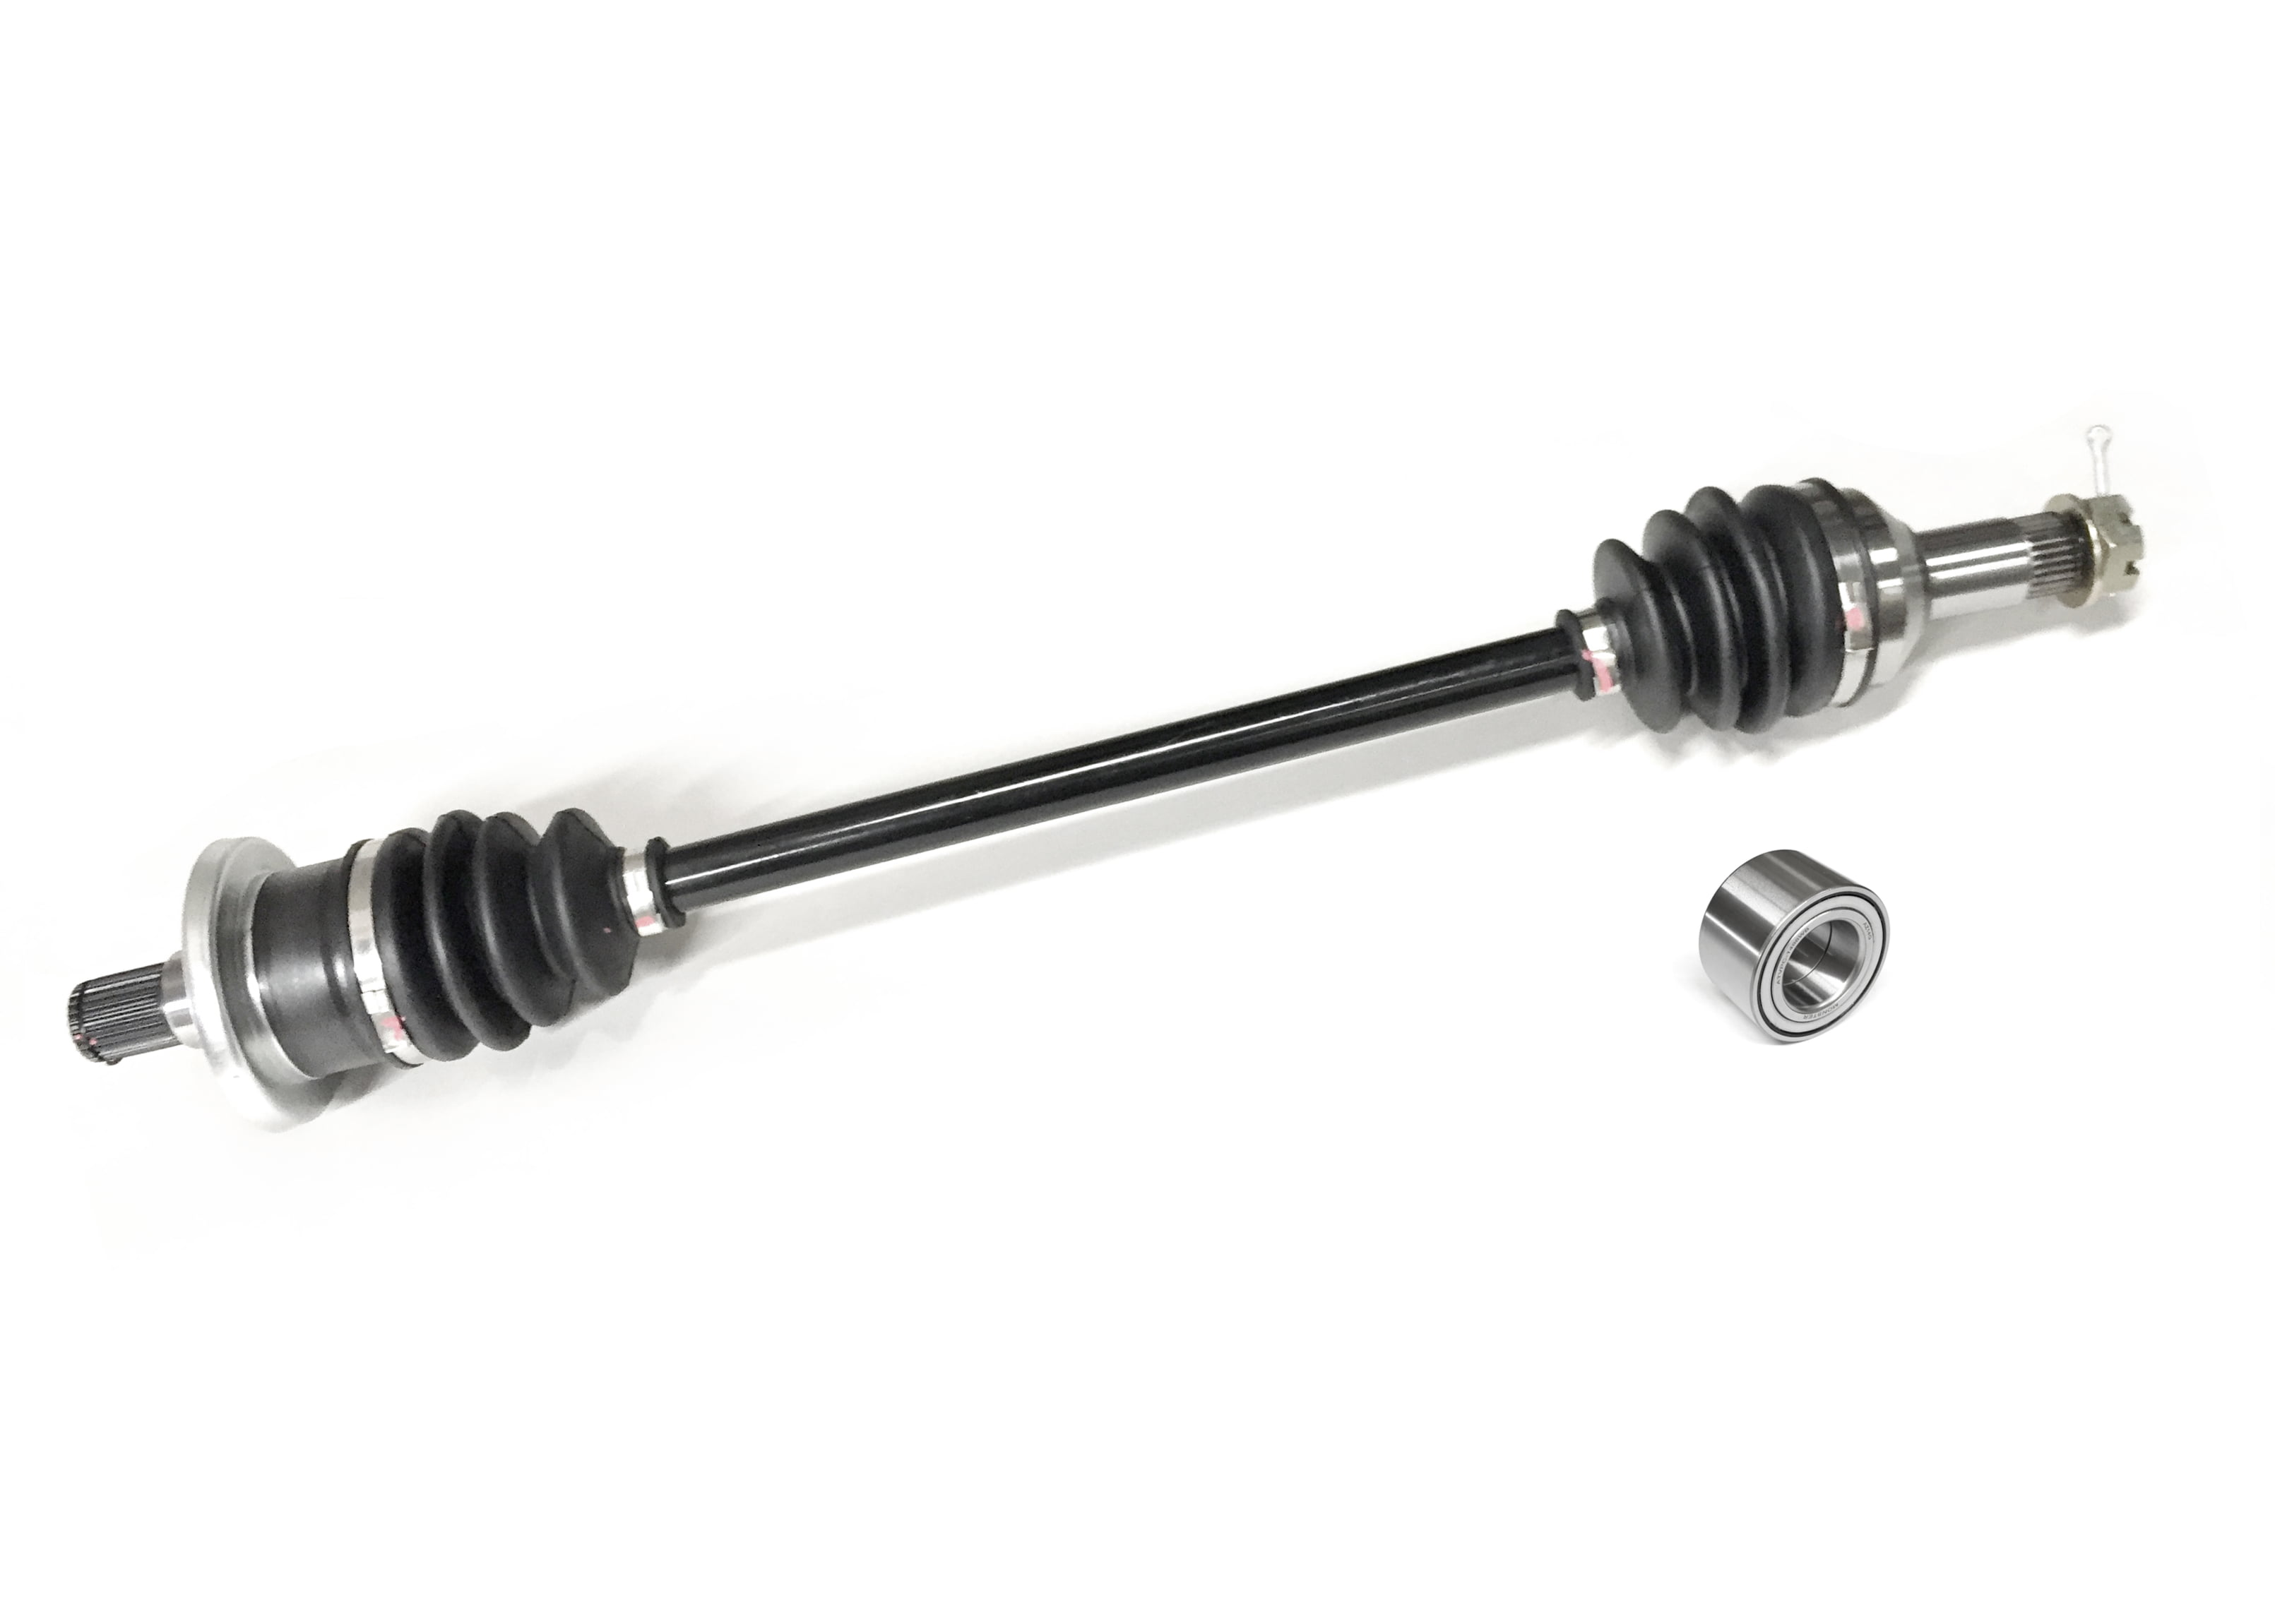 2009 with 27 inner splines Rear CV Axle Shafts for Arctic Cat Prowler XT 700